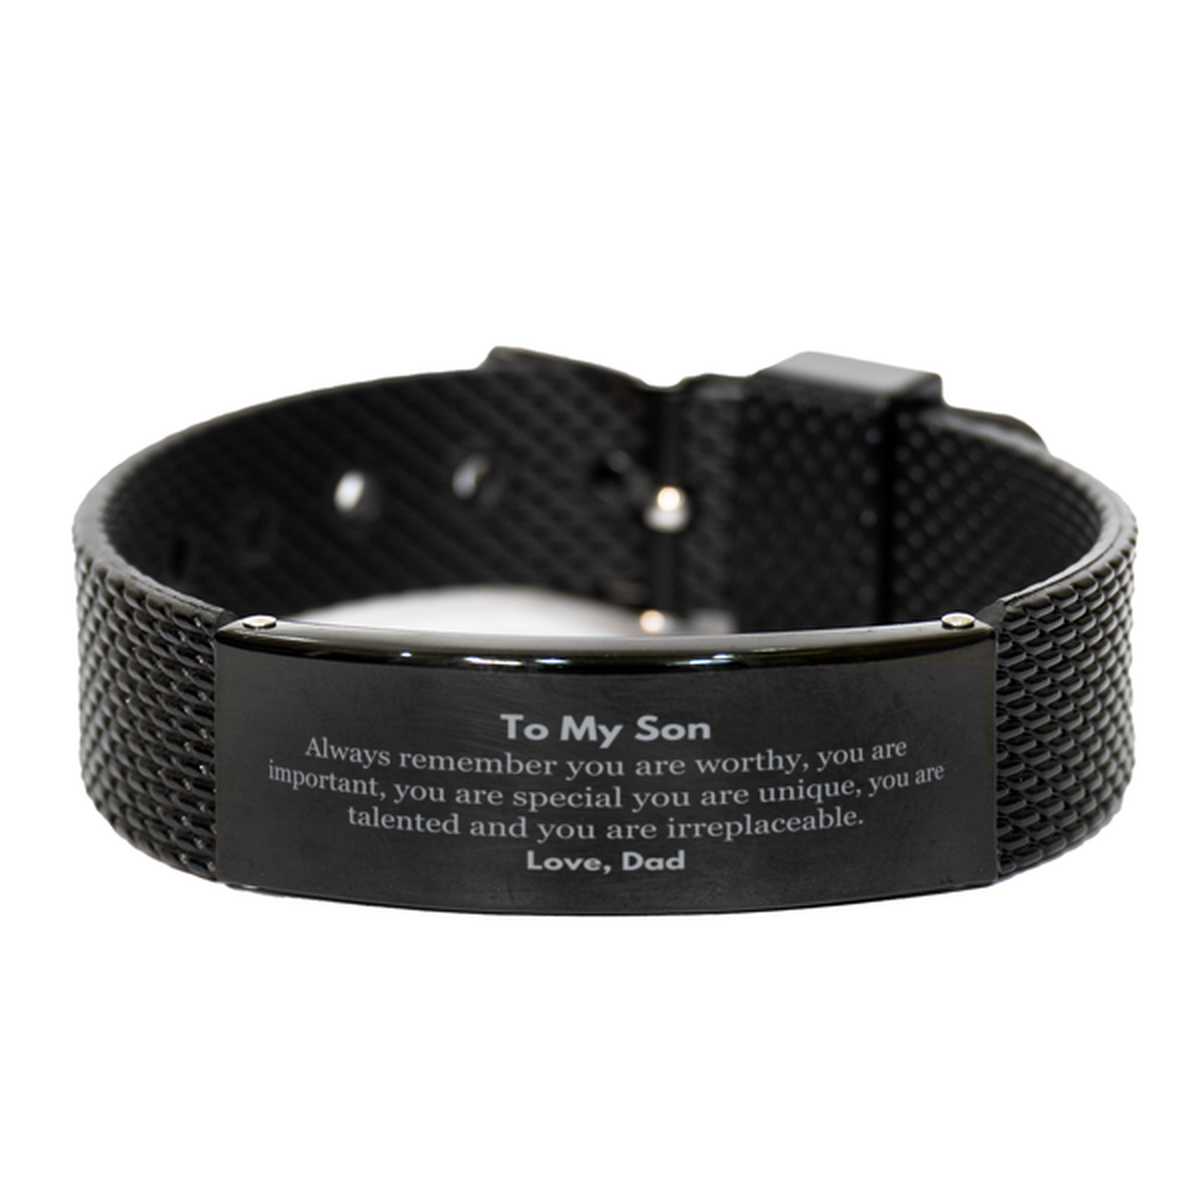 Son Birthday Gifts from Dad, Inspirational Black Shark Mesh Bracelet for Son Christmas Graduation Gifts for Son Always remember you are worthy, you are important. Love, Dad